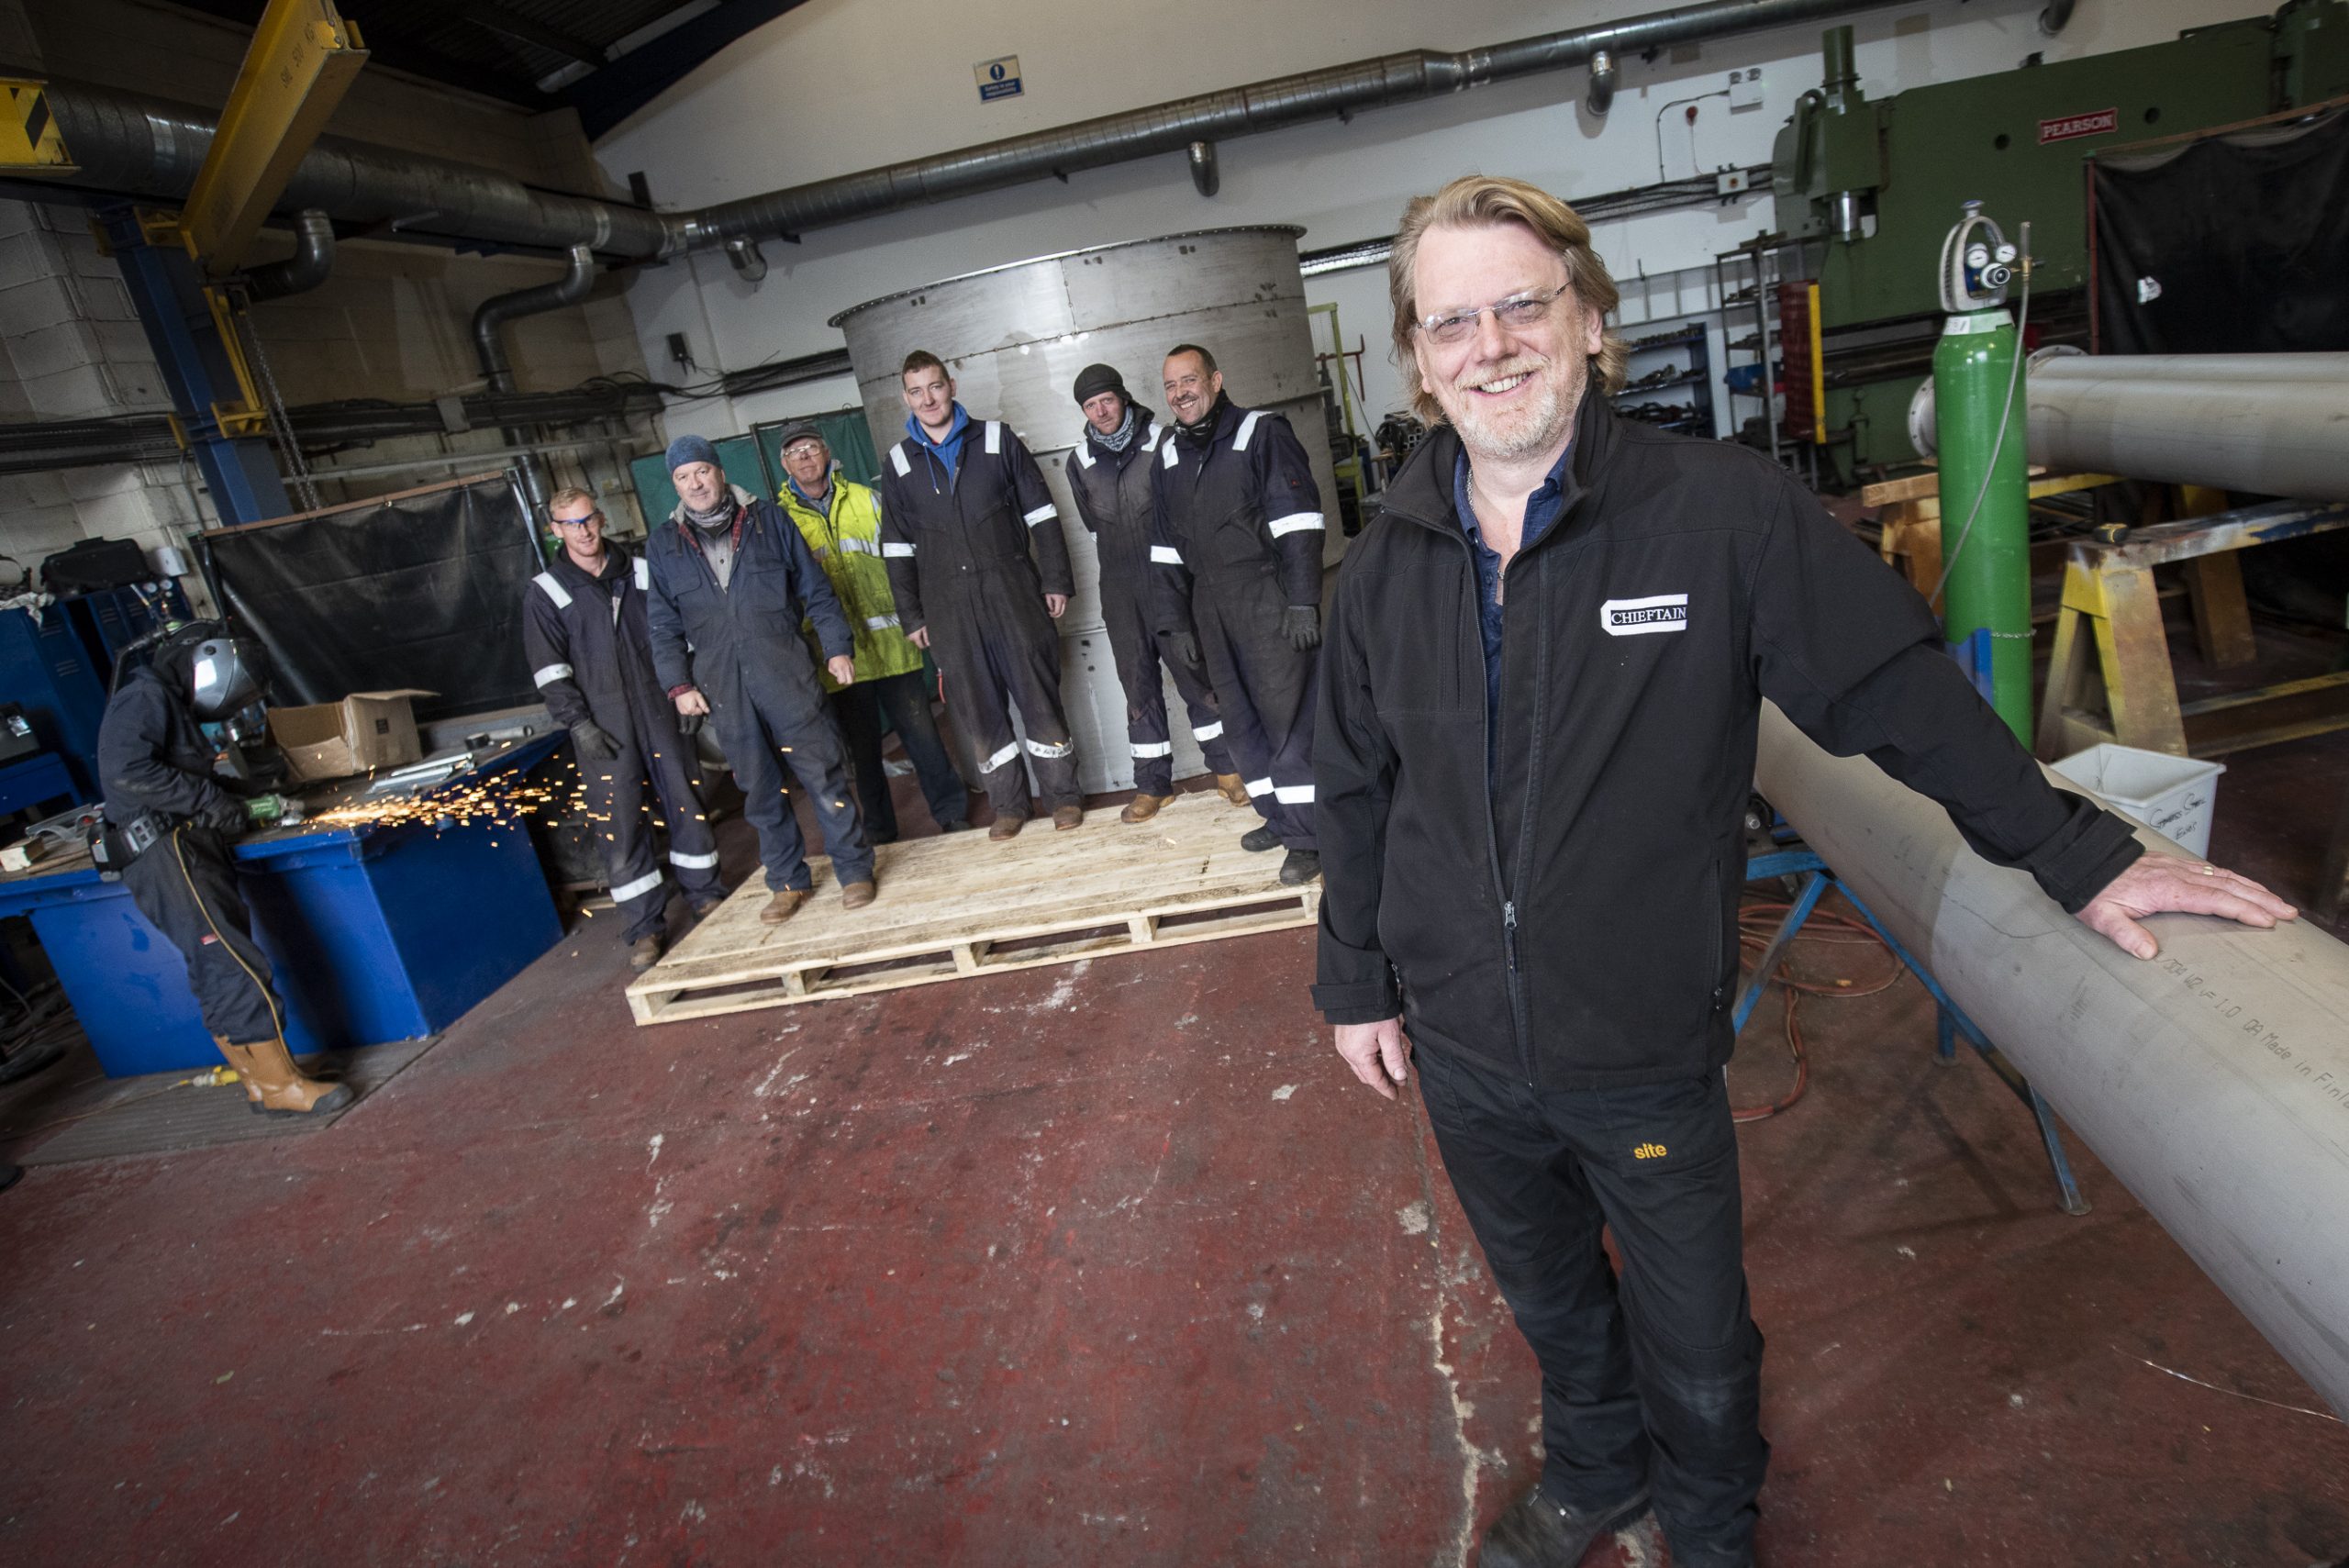 Fabrication Boss is Made Up with Firm’s Progress